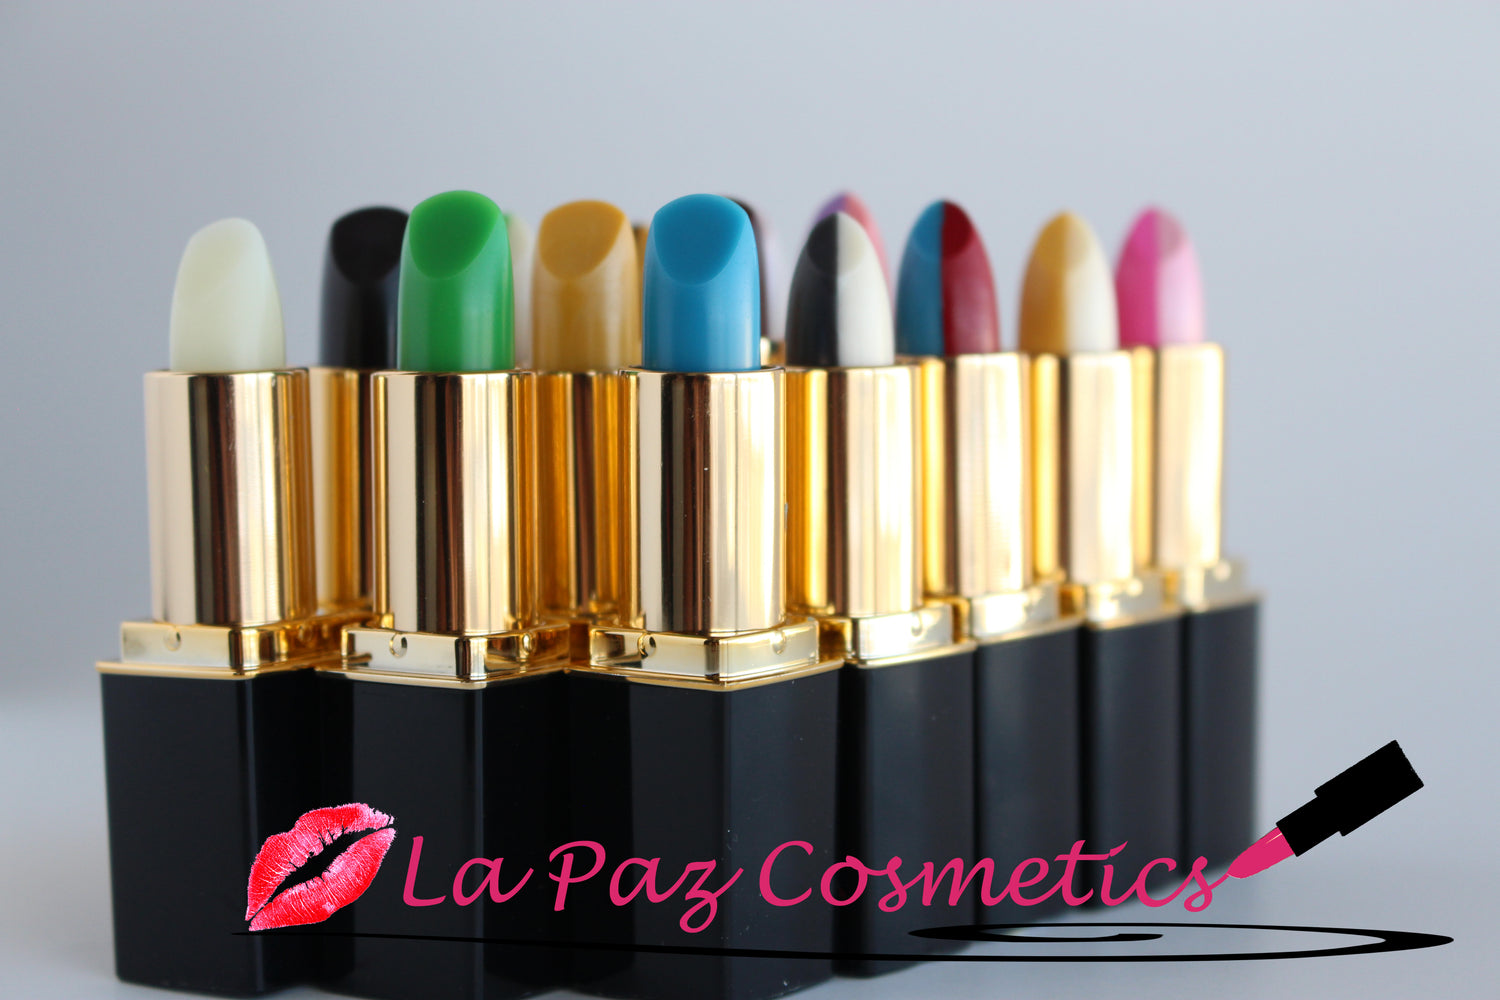 We at La Paz Cosmetics invite you to explore the many shades of lasting beauty in L'Paige Lipstics